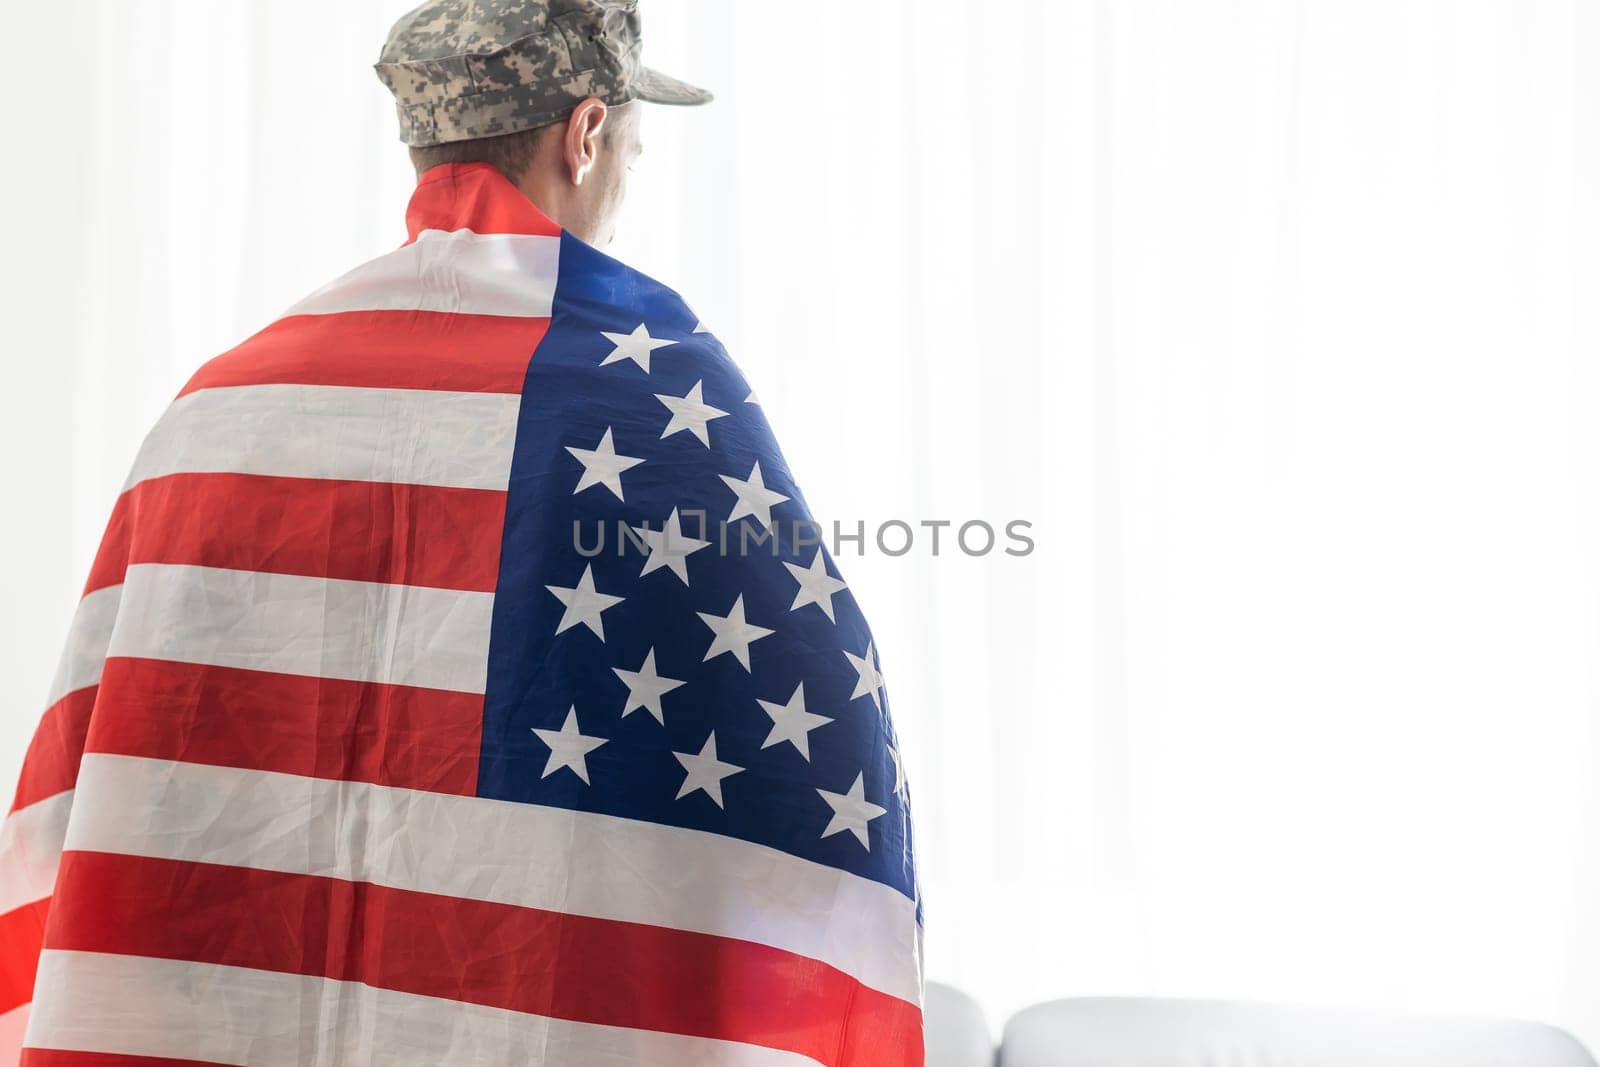 soldier in uniform and cap holding american flag by Andelov13